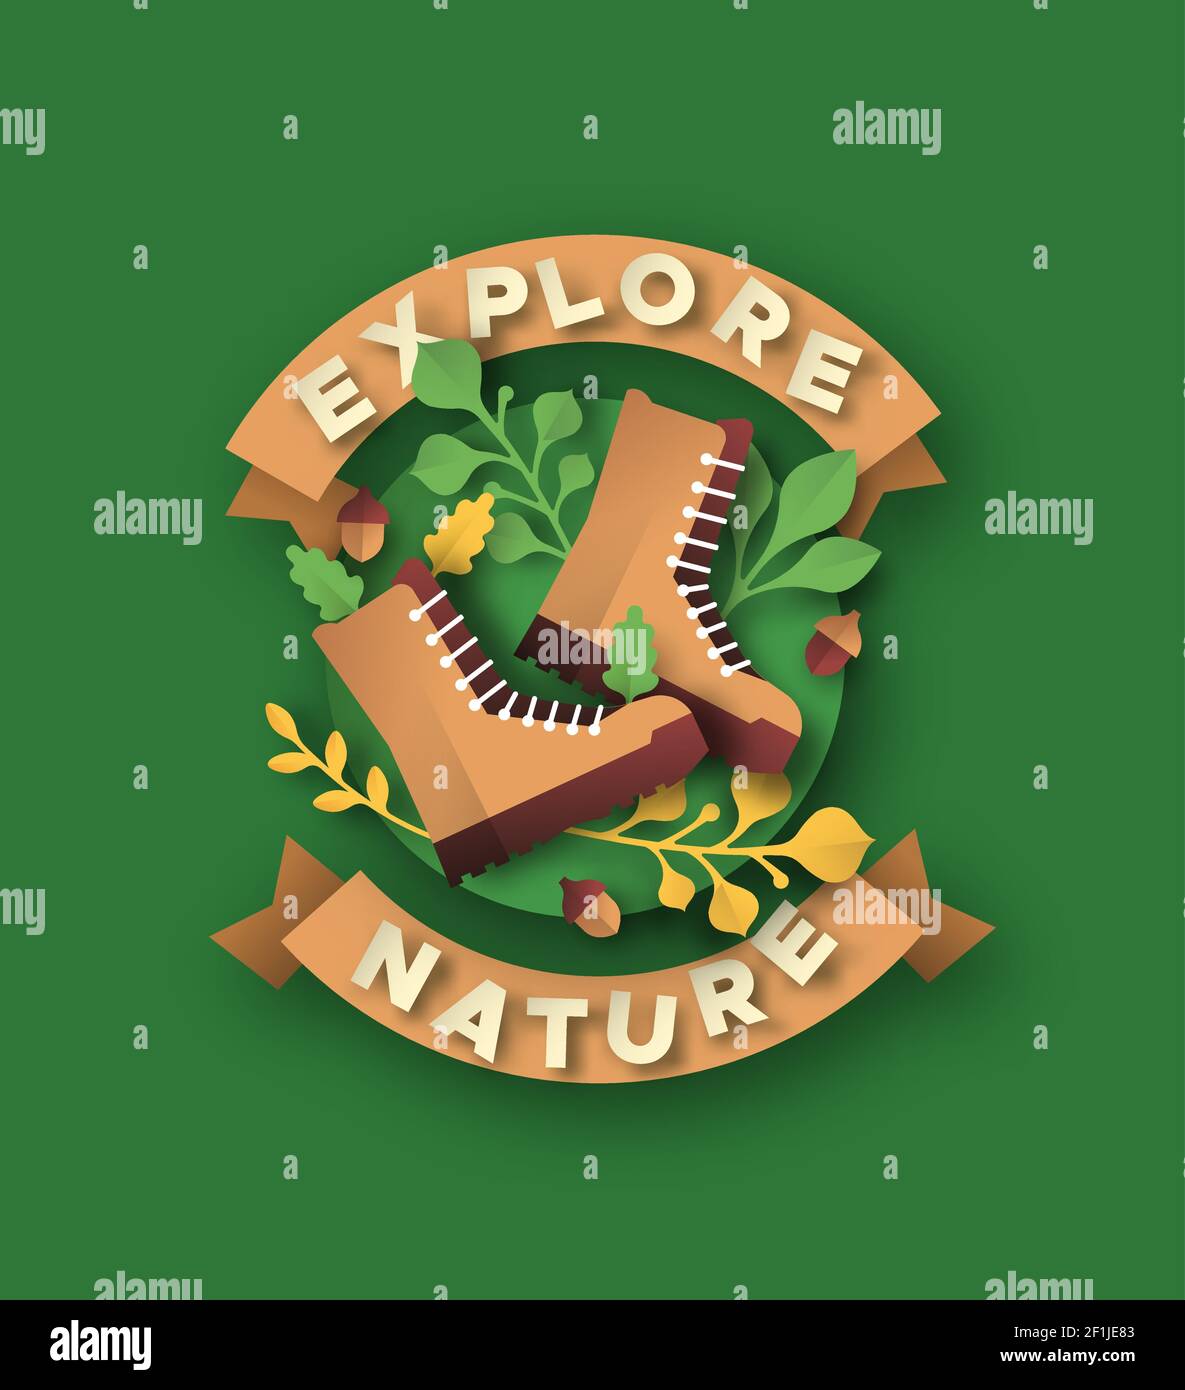 Explore nature quote label in 3d paper cut craft style. Outdoor adventure illustration with papercut camping boots and green leaf decoration. Hike spo Stock Vector